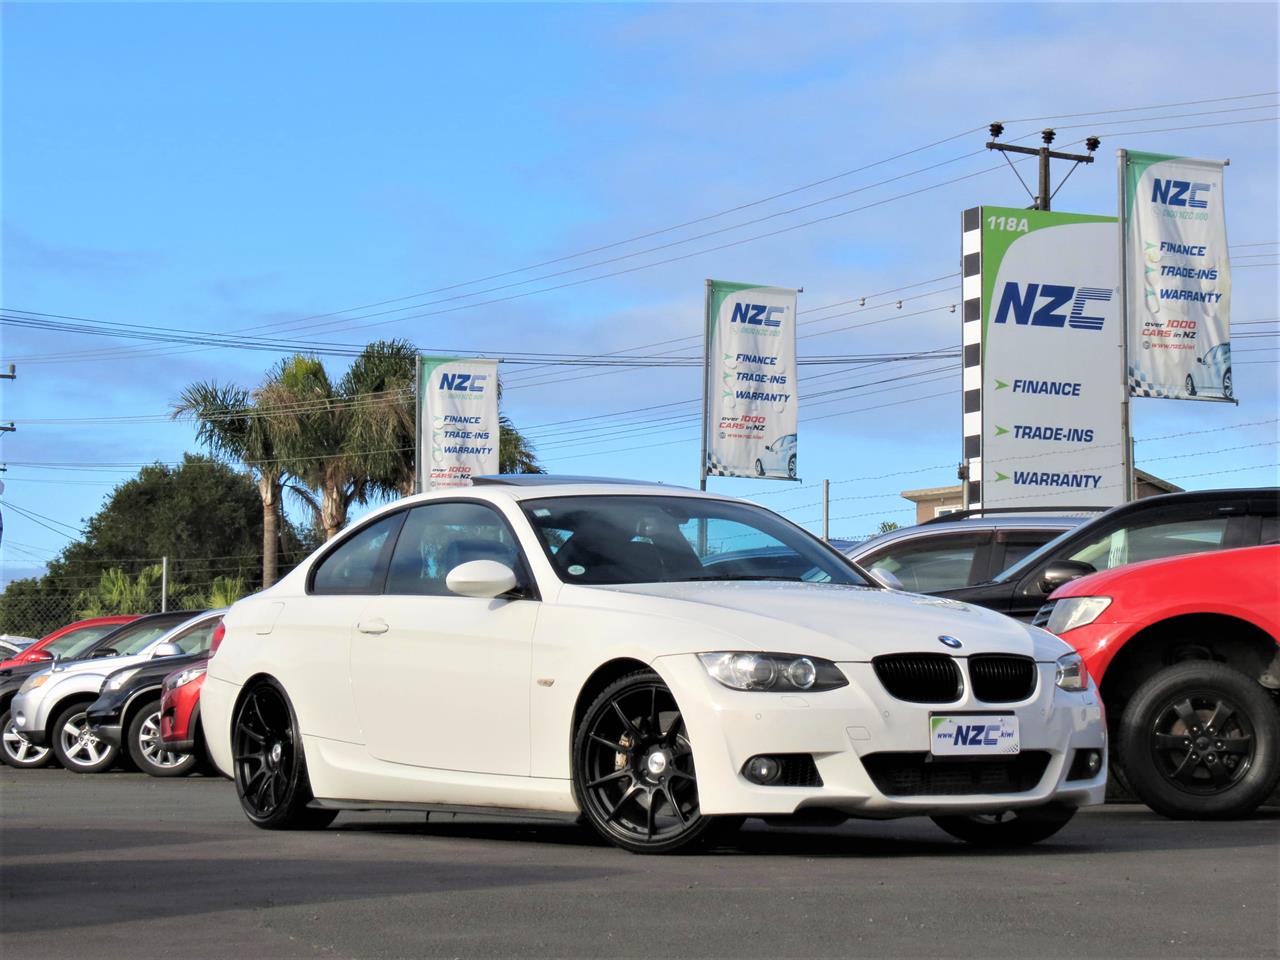 NZC 2008 BMW 335i just arrived to Auckland